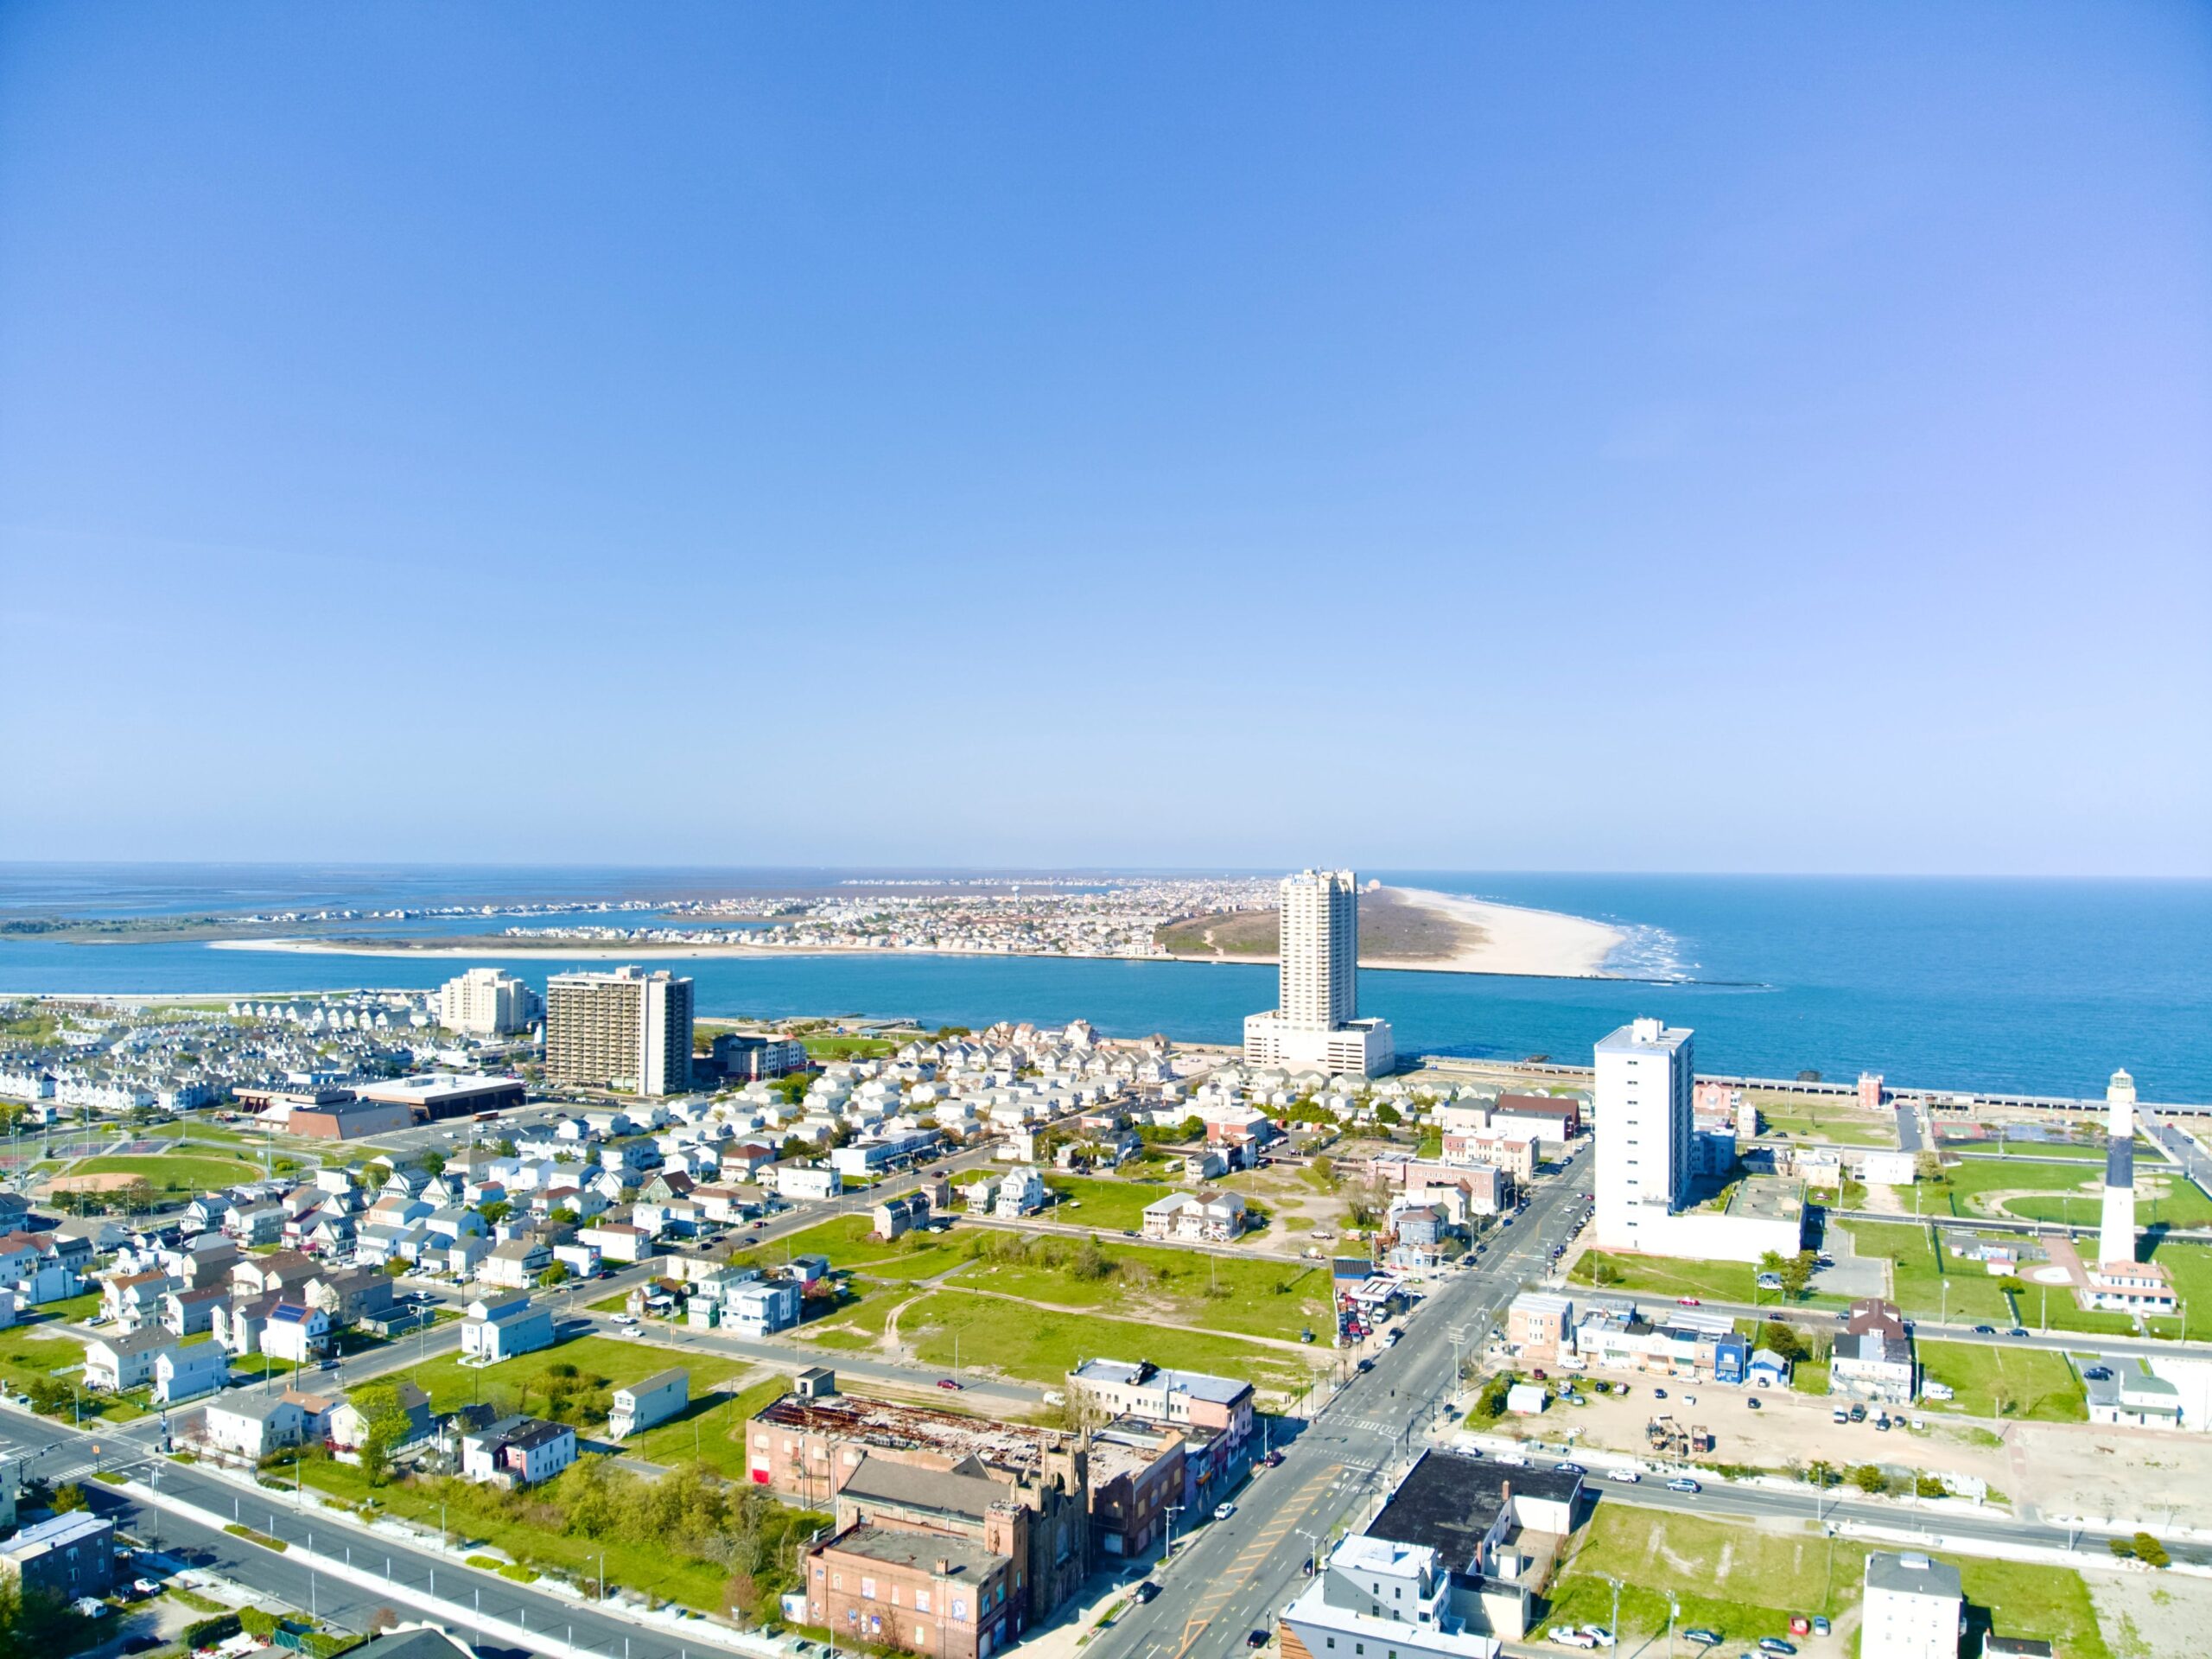 For beachfront living and incredible nightlife, Atlantic City is one of the best places to live in New Jersey. Pictured: An aerial view of Atlantic City.